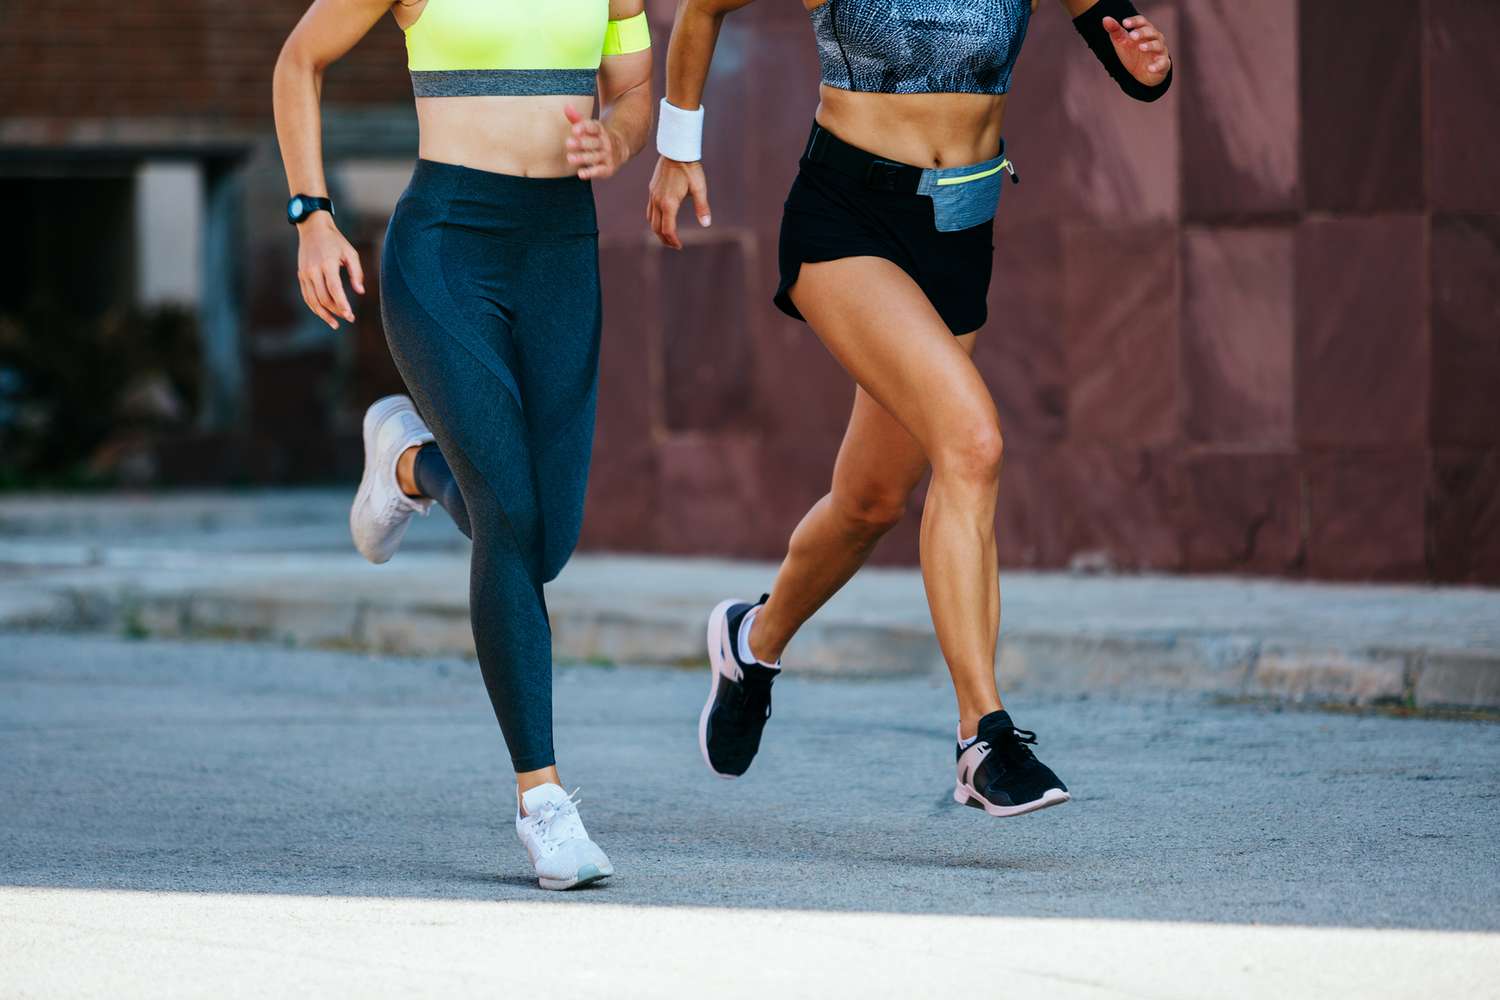 the lower half of two women running or training for a race